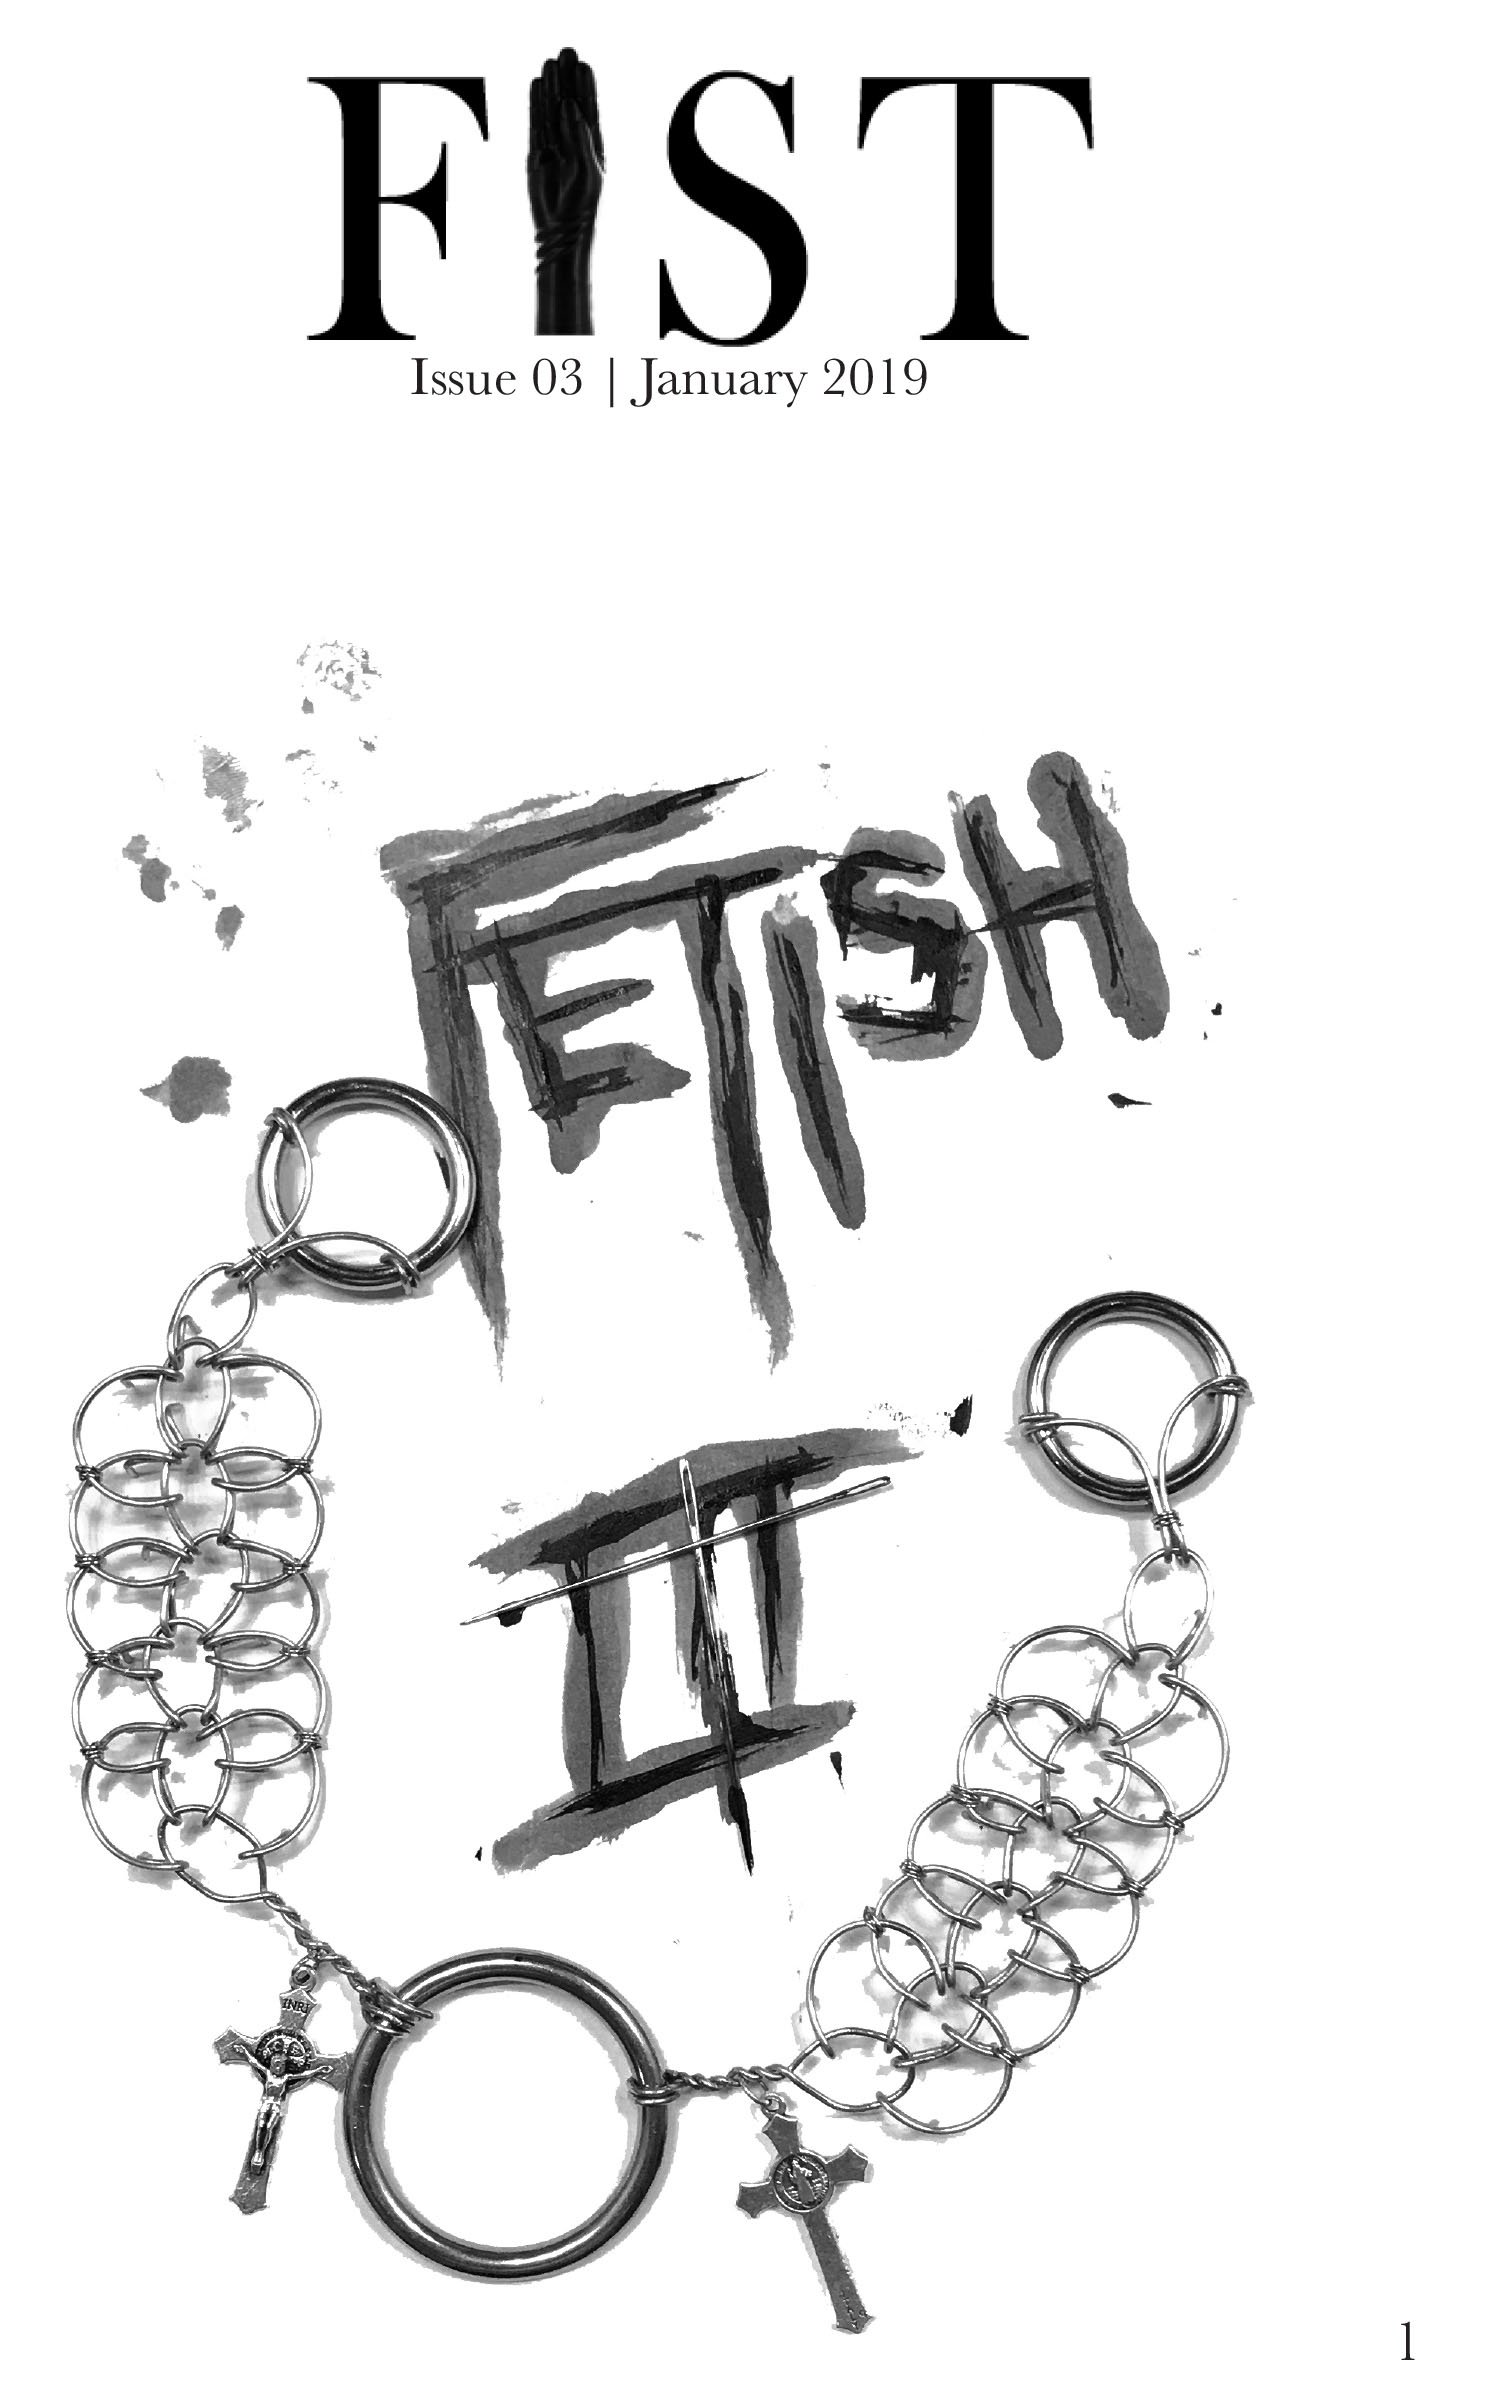 Image of FIST Issue 03: Fetish